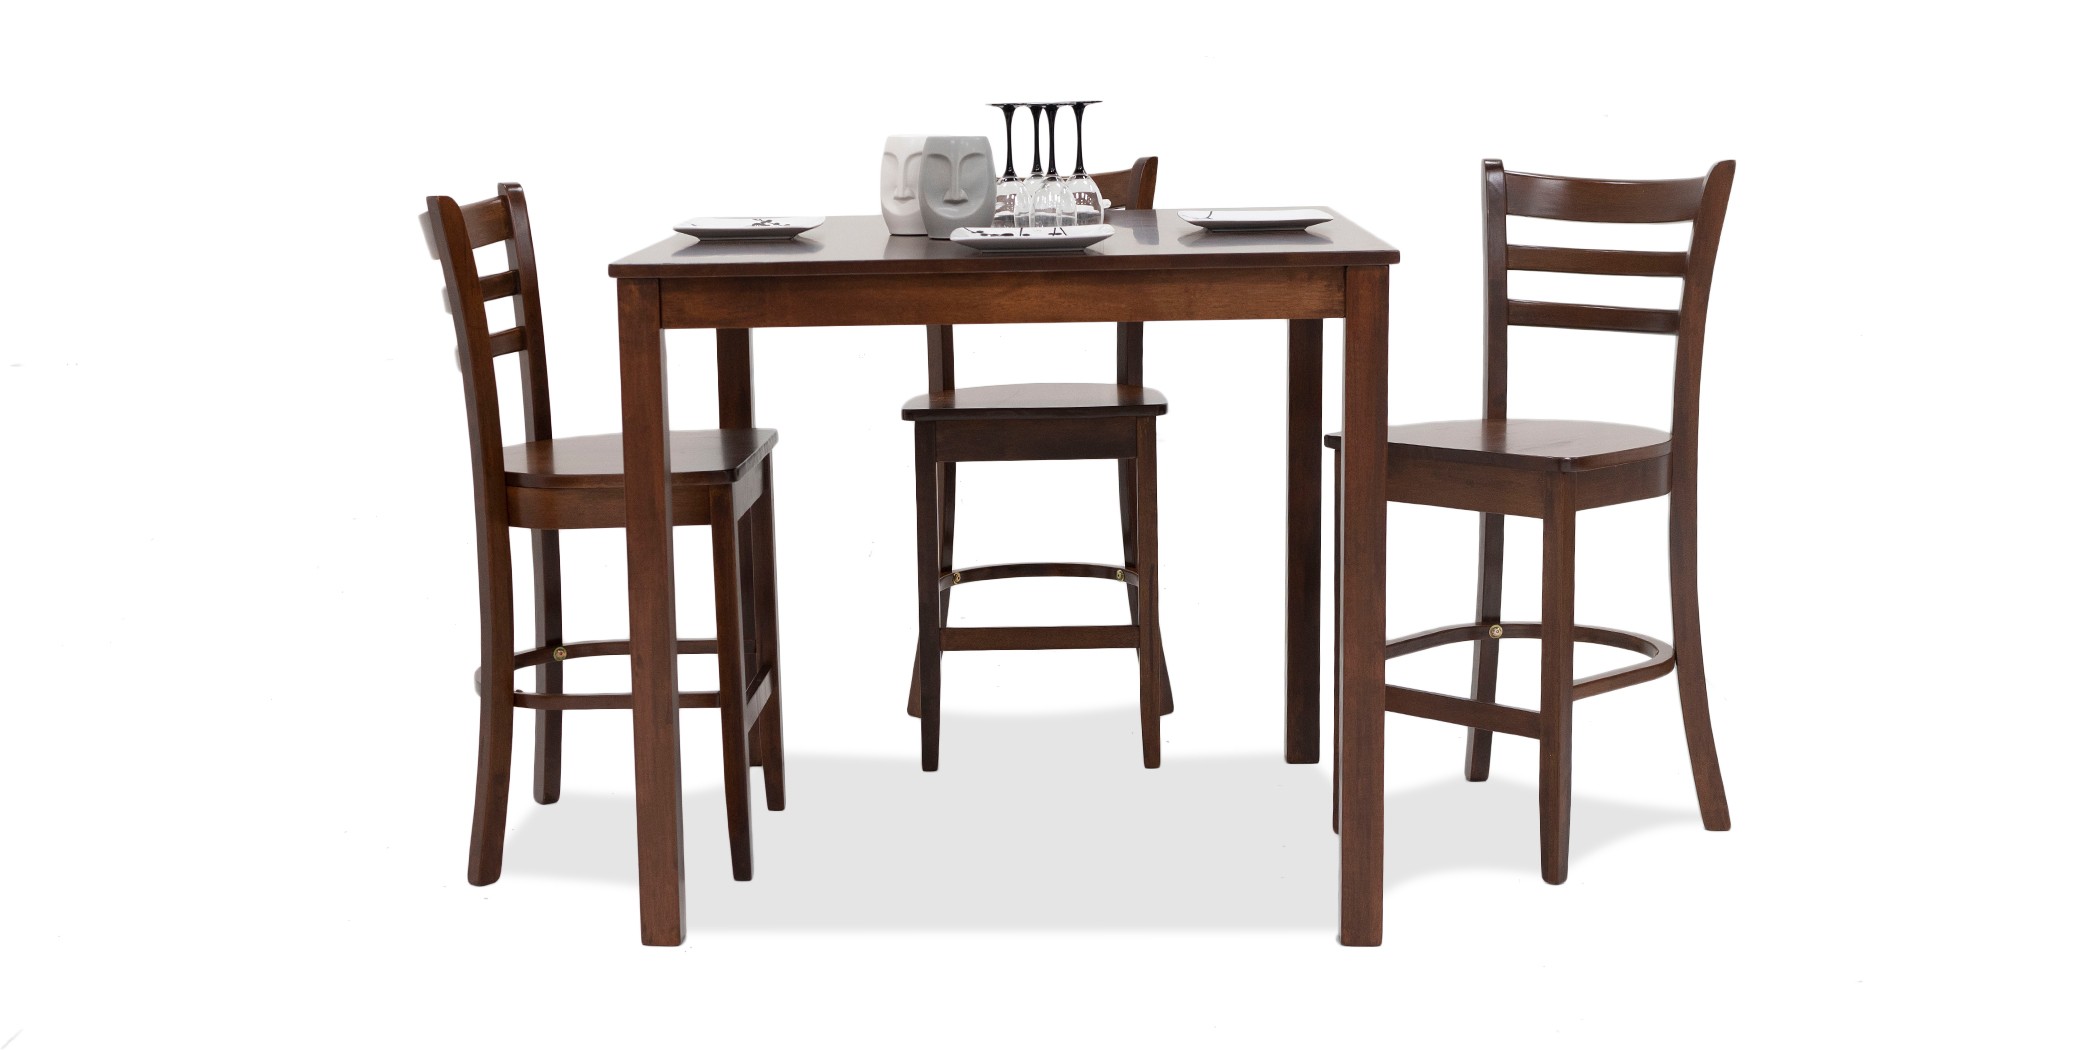 Lydon Table and 4 Chairs Rubberwood